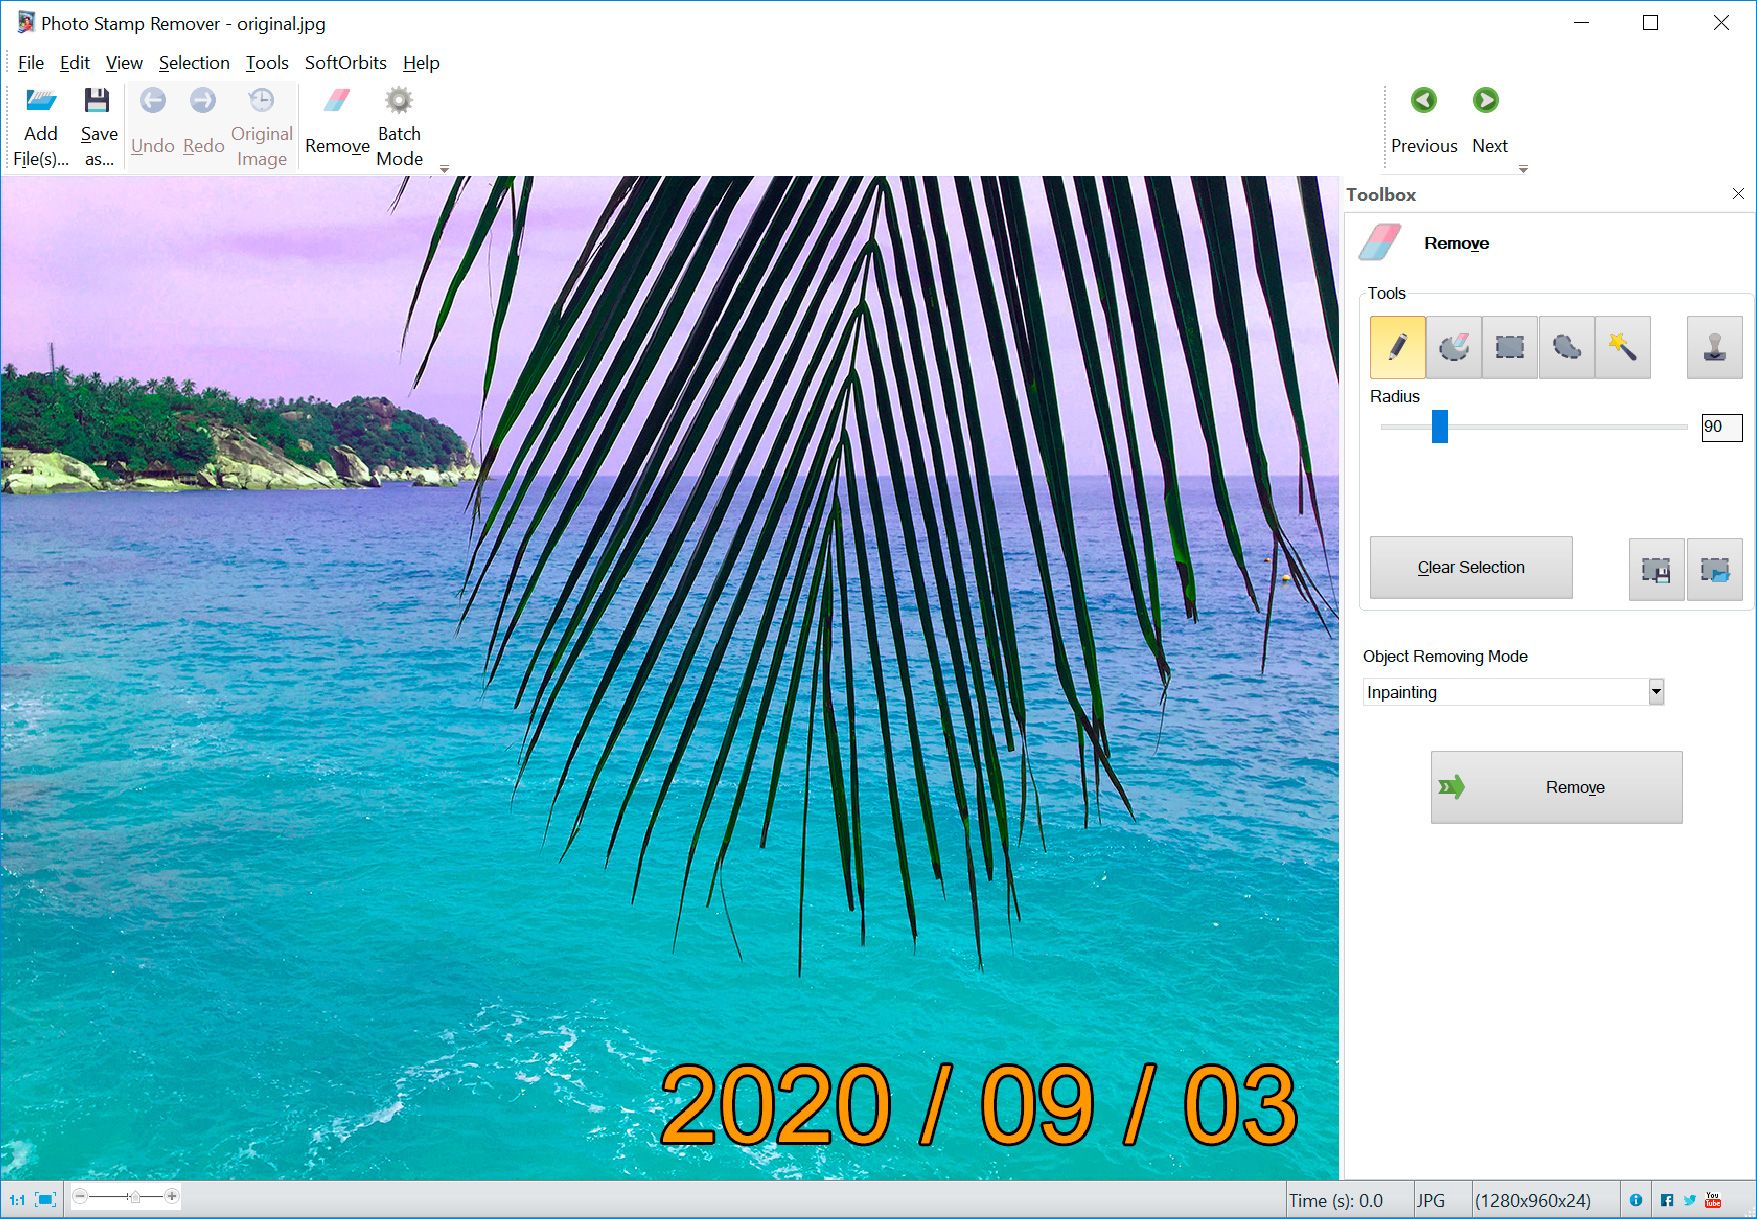 Software to remove the date stamp from photos..